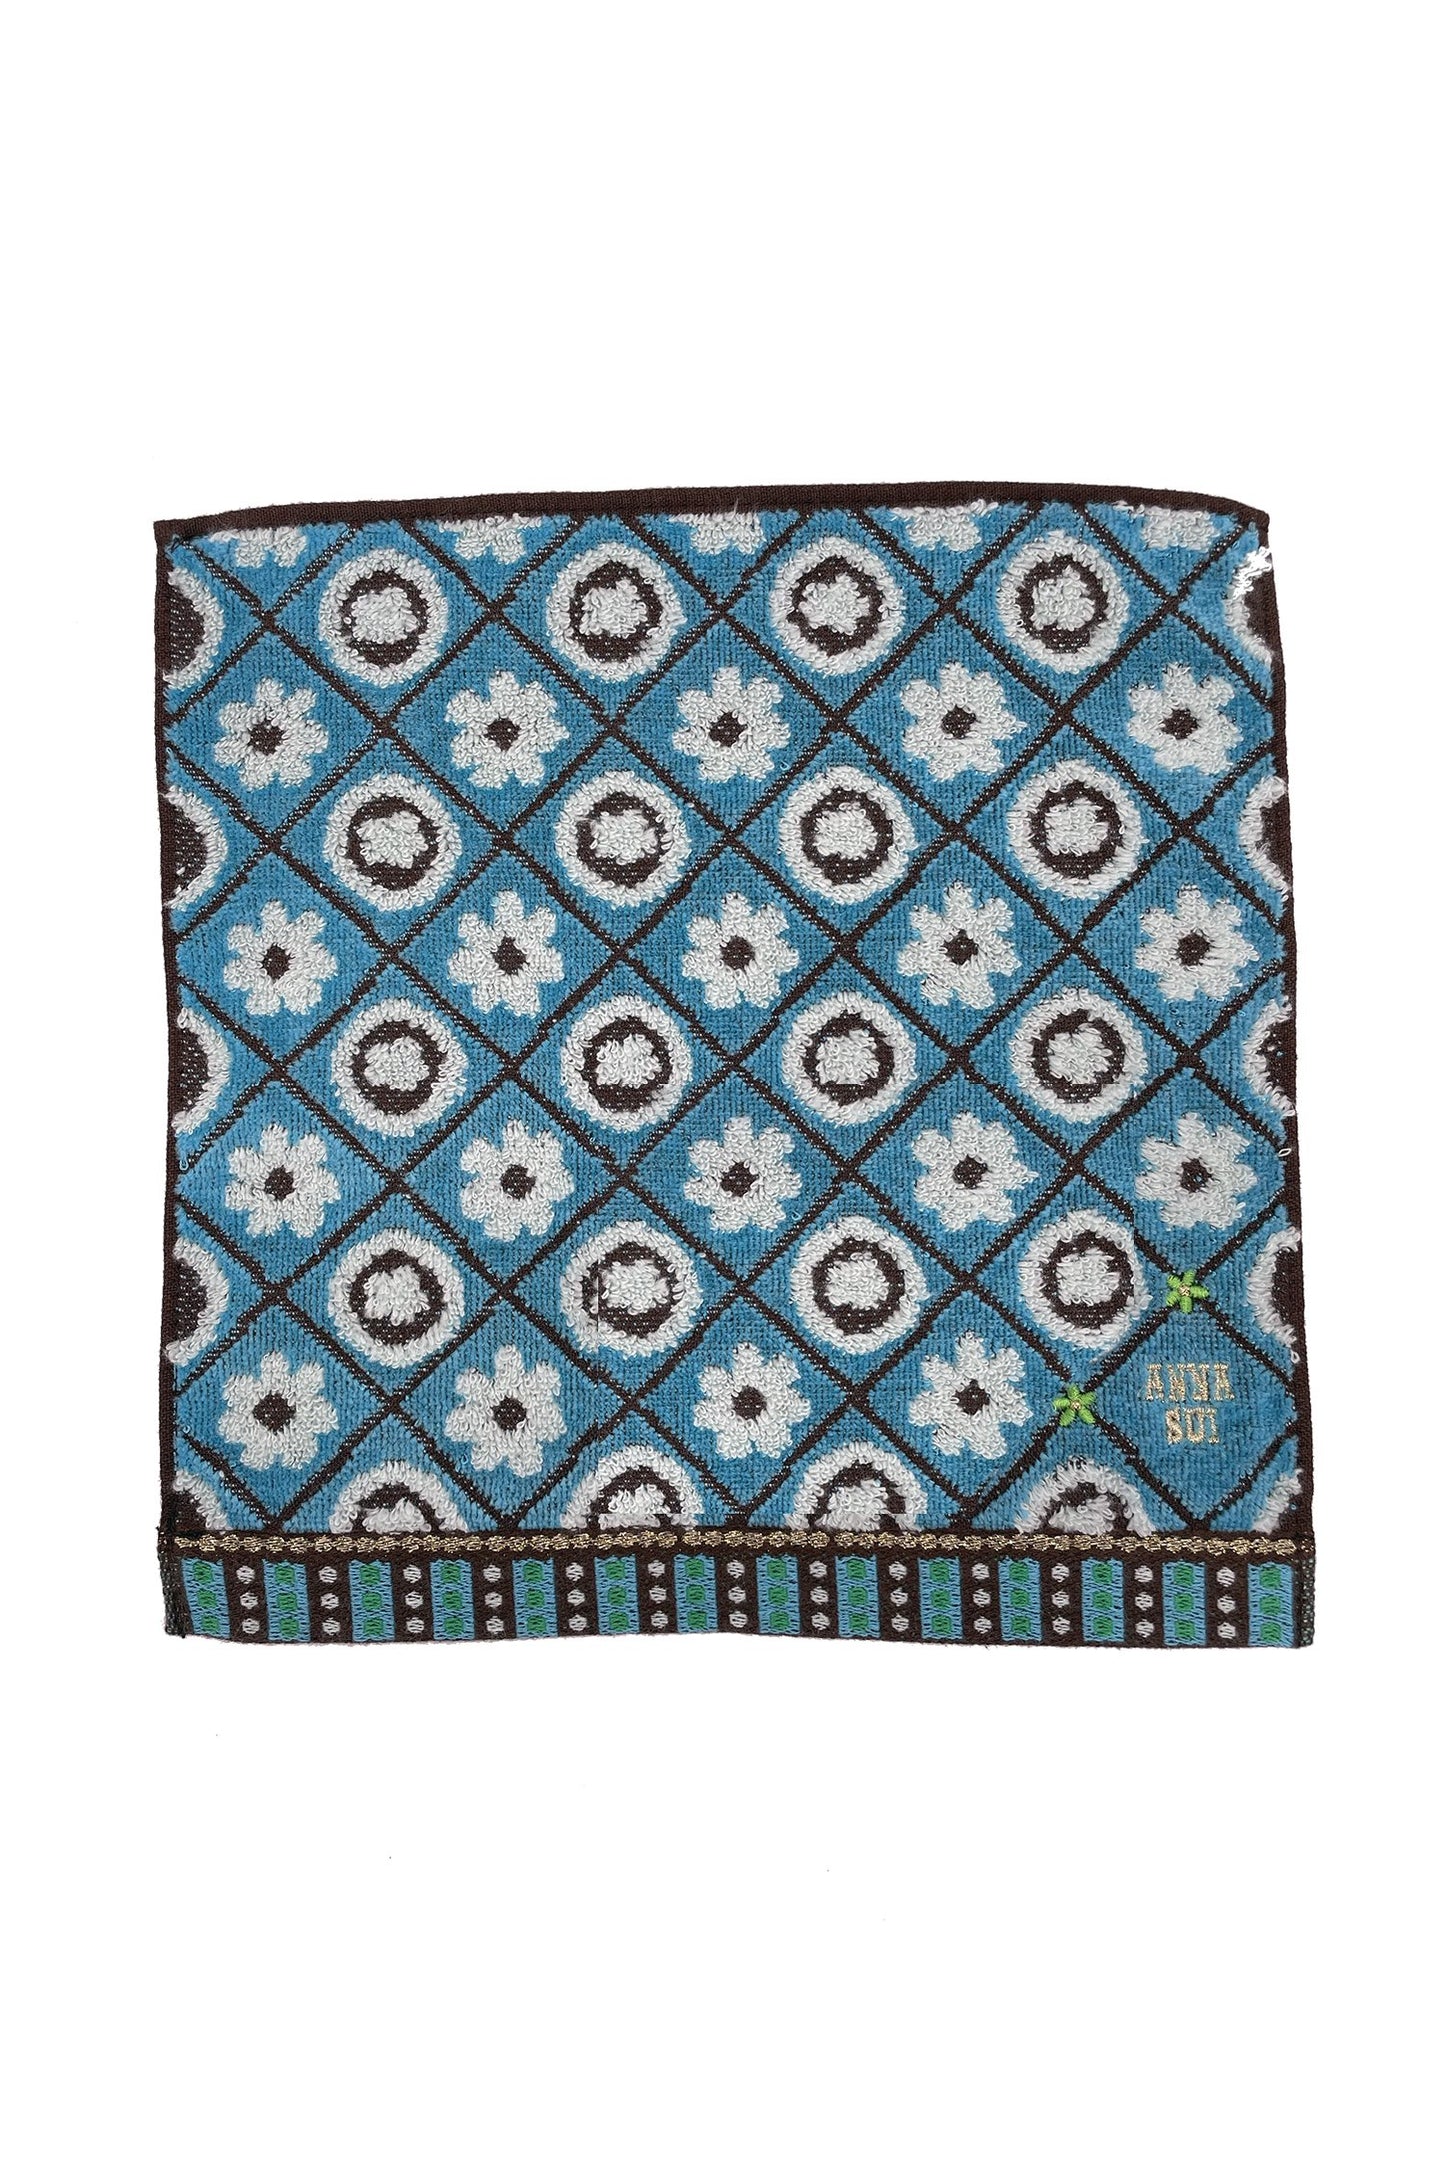 Washcloth light blue with Floral Lattice in white, black lines to highlight the diamonds, Anna Sui's label